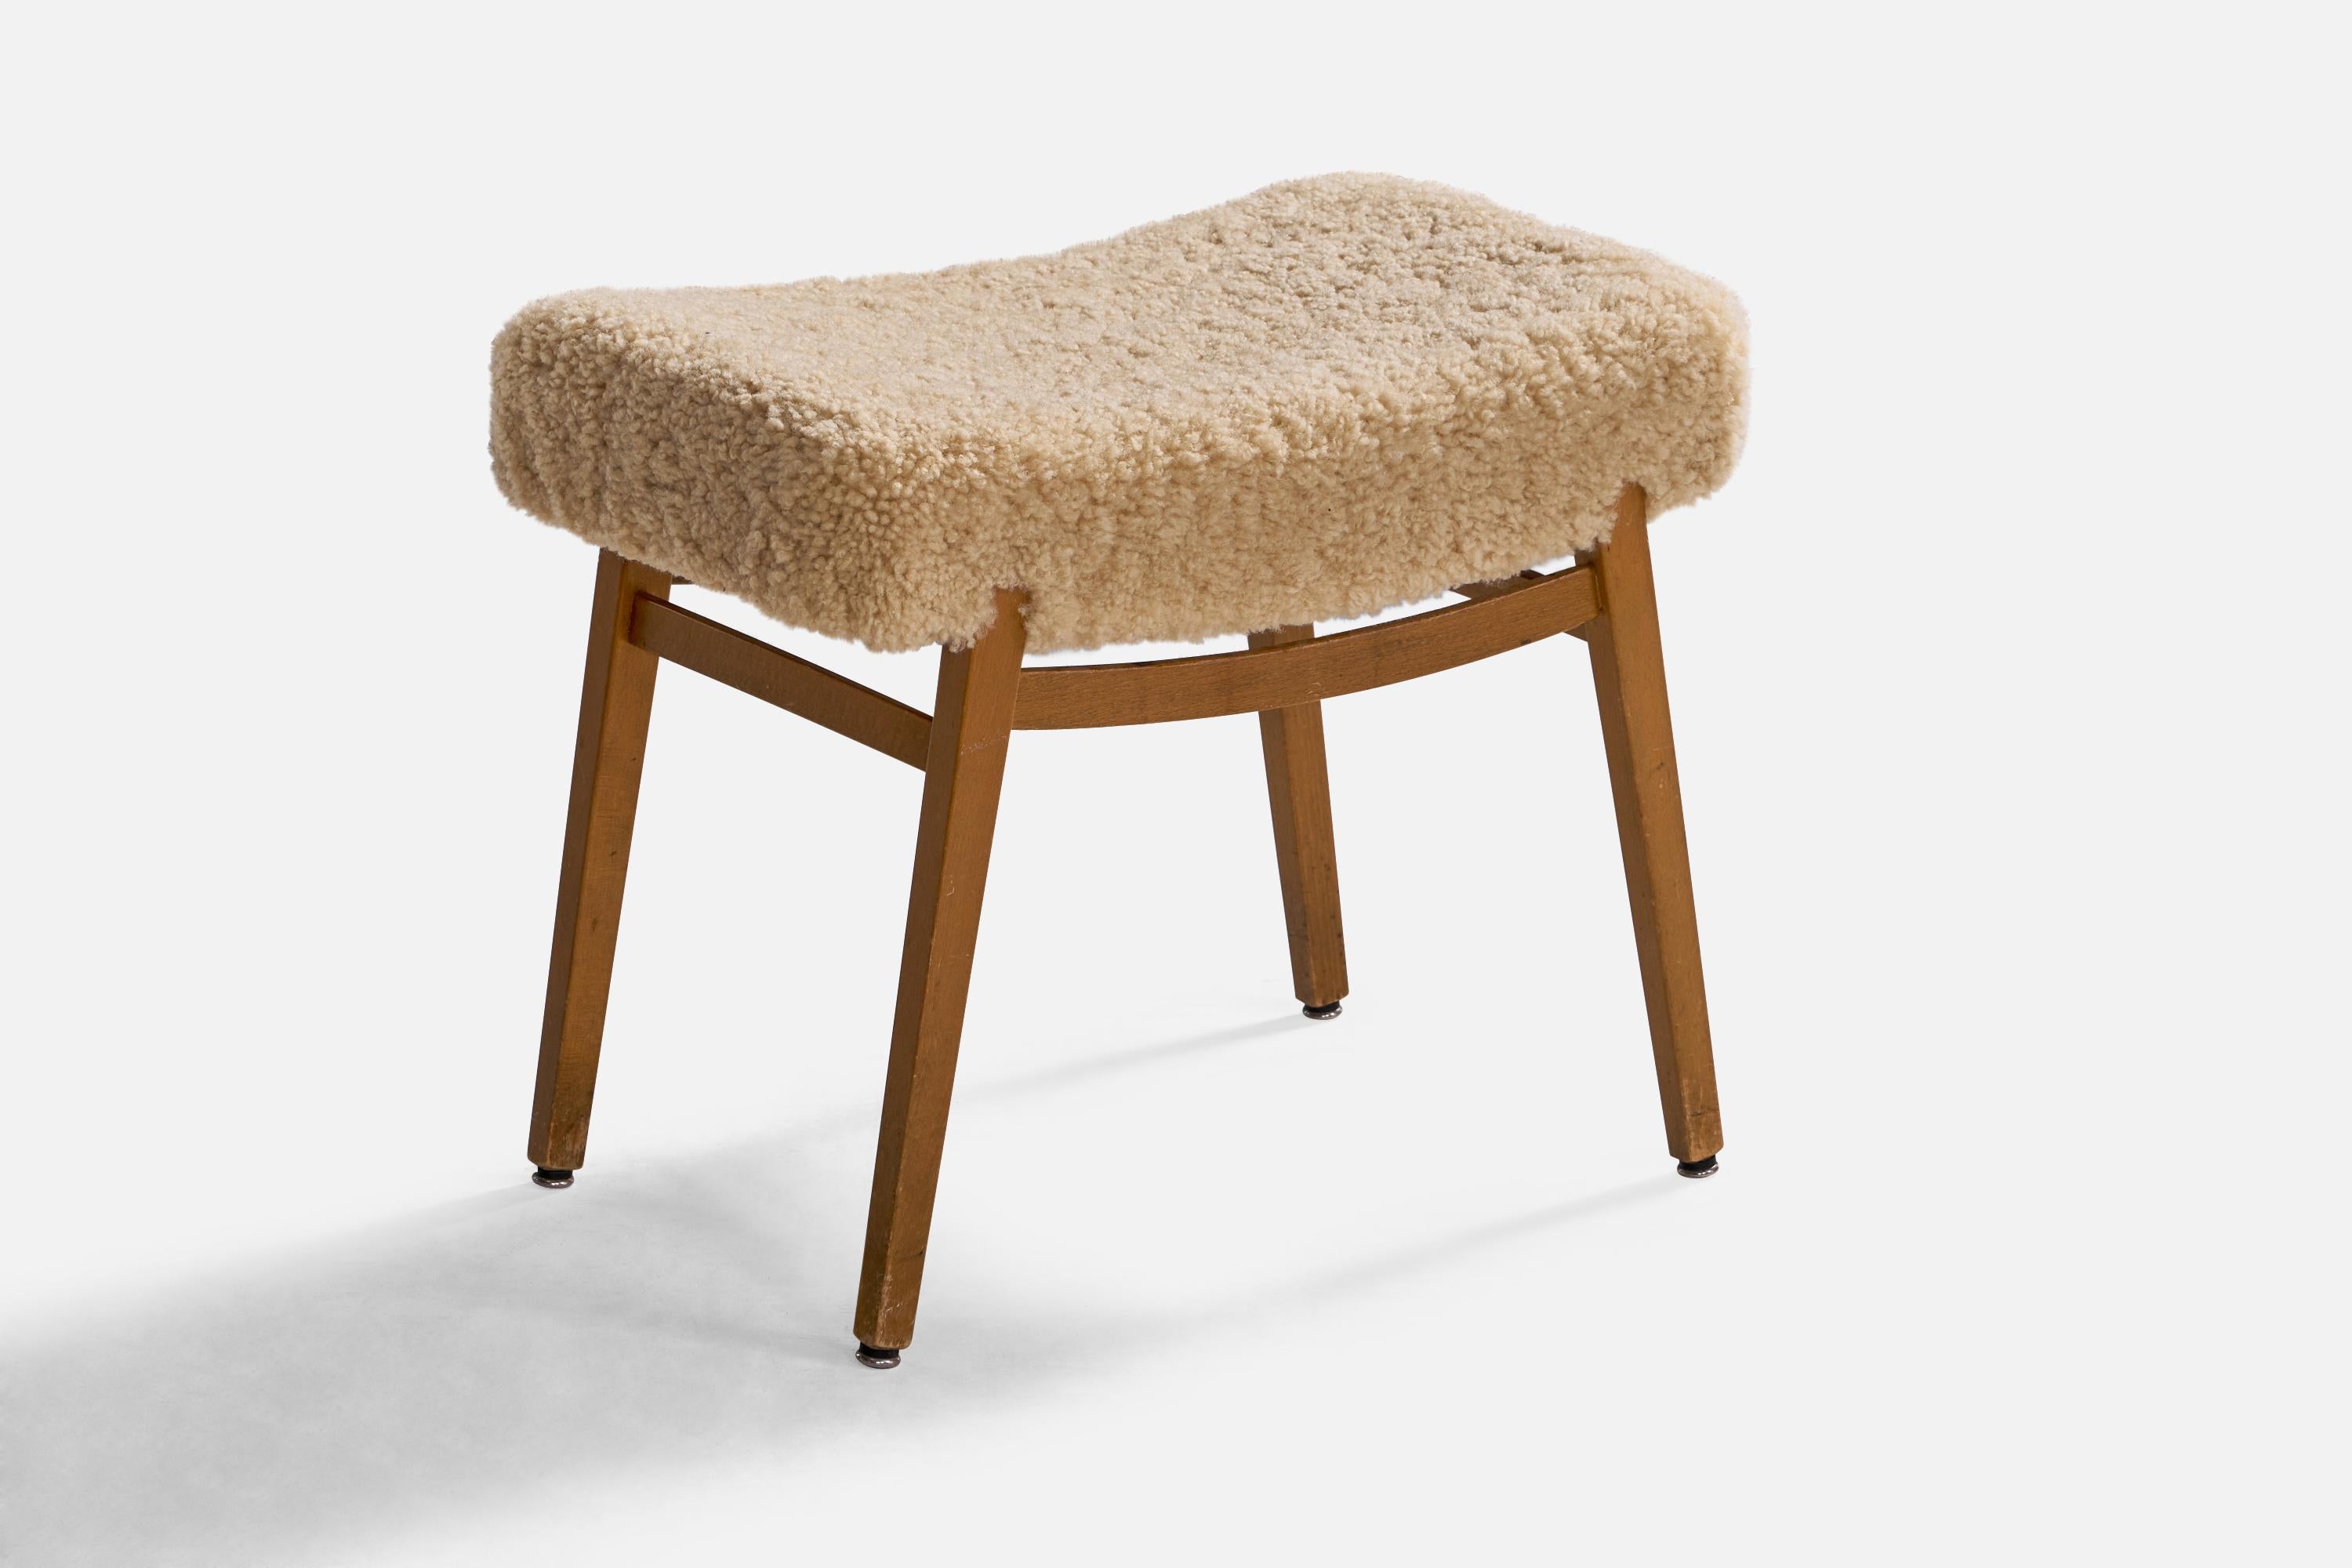 A beige shearling and oak stool designed and produced in Sweden, 1950s.

seat height: 18.25

